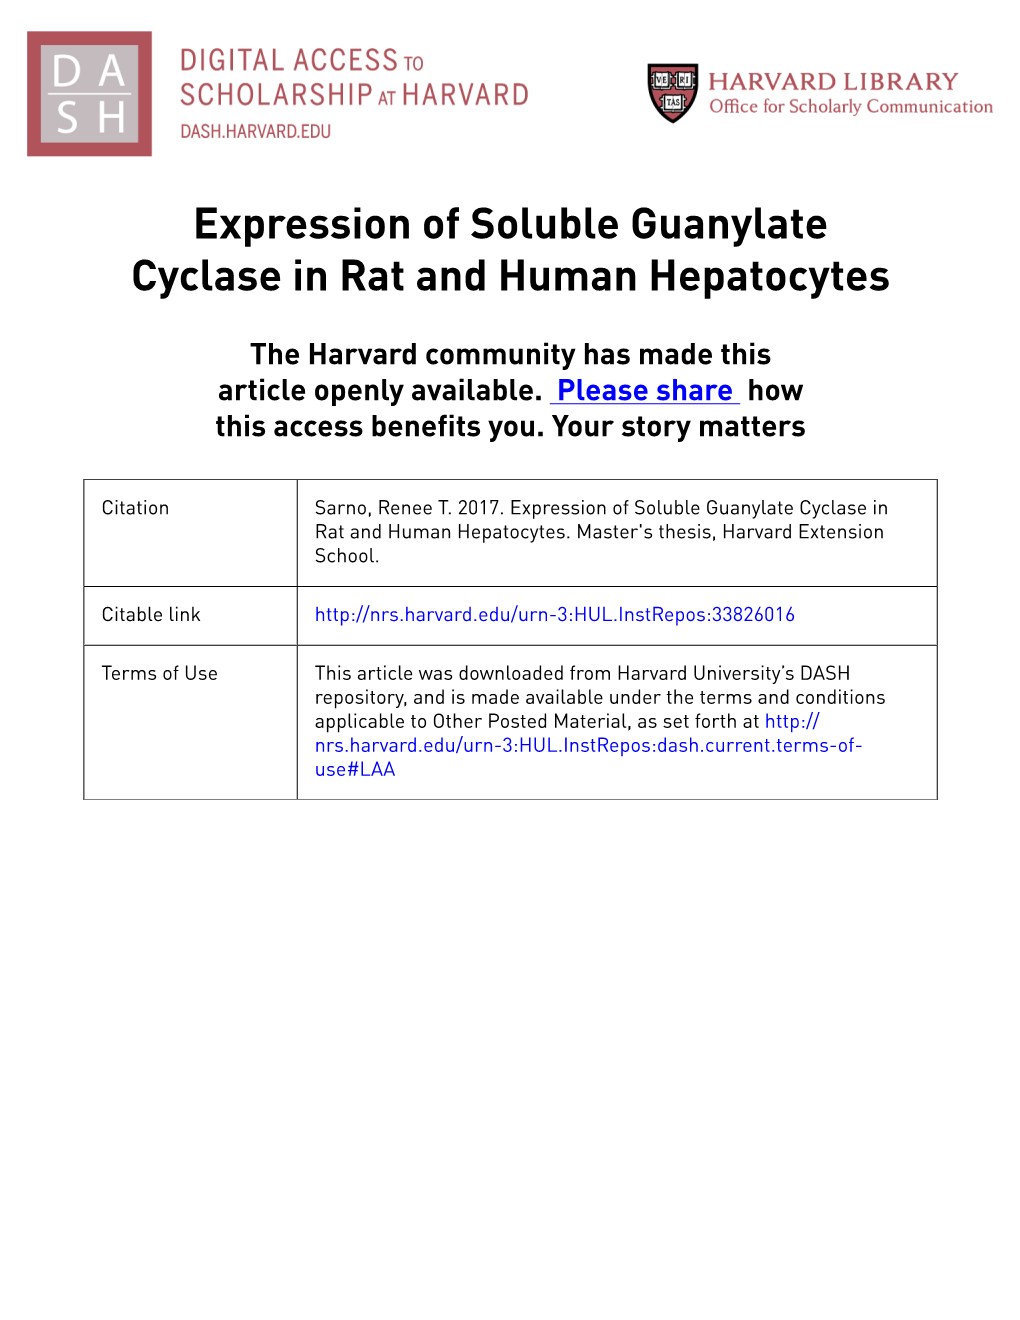 Expression of Soluble Guanylate Cyclase in Rat and Human Hepatocytes